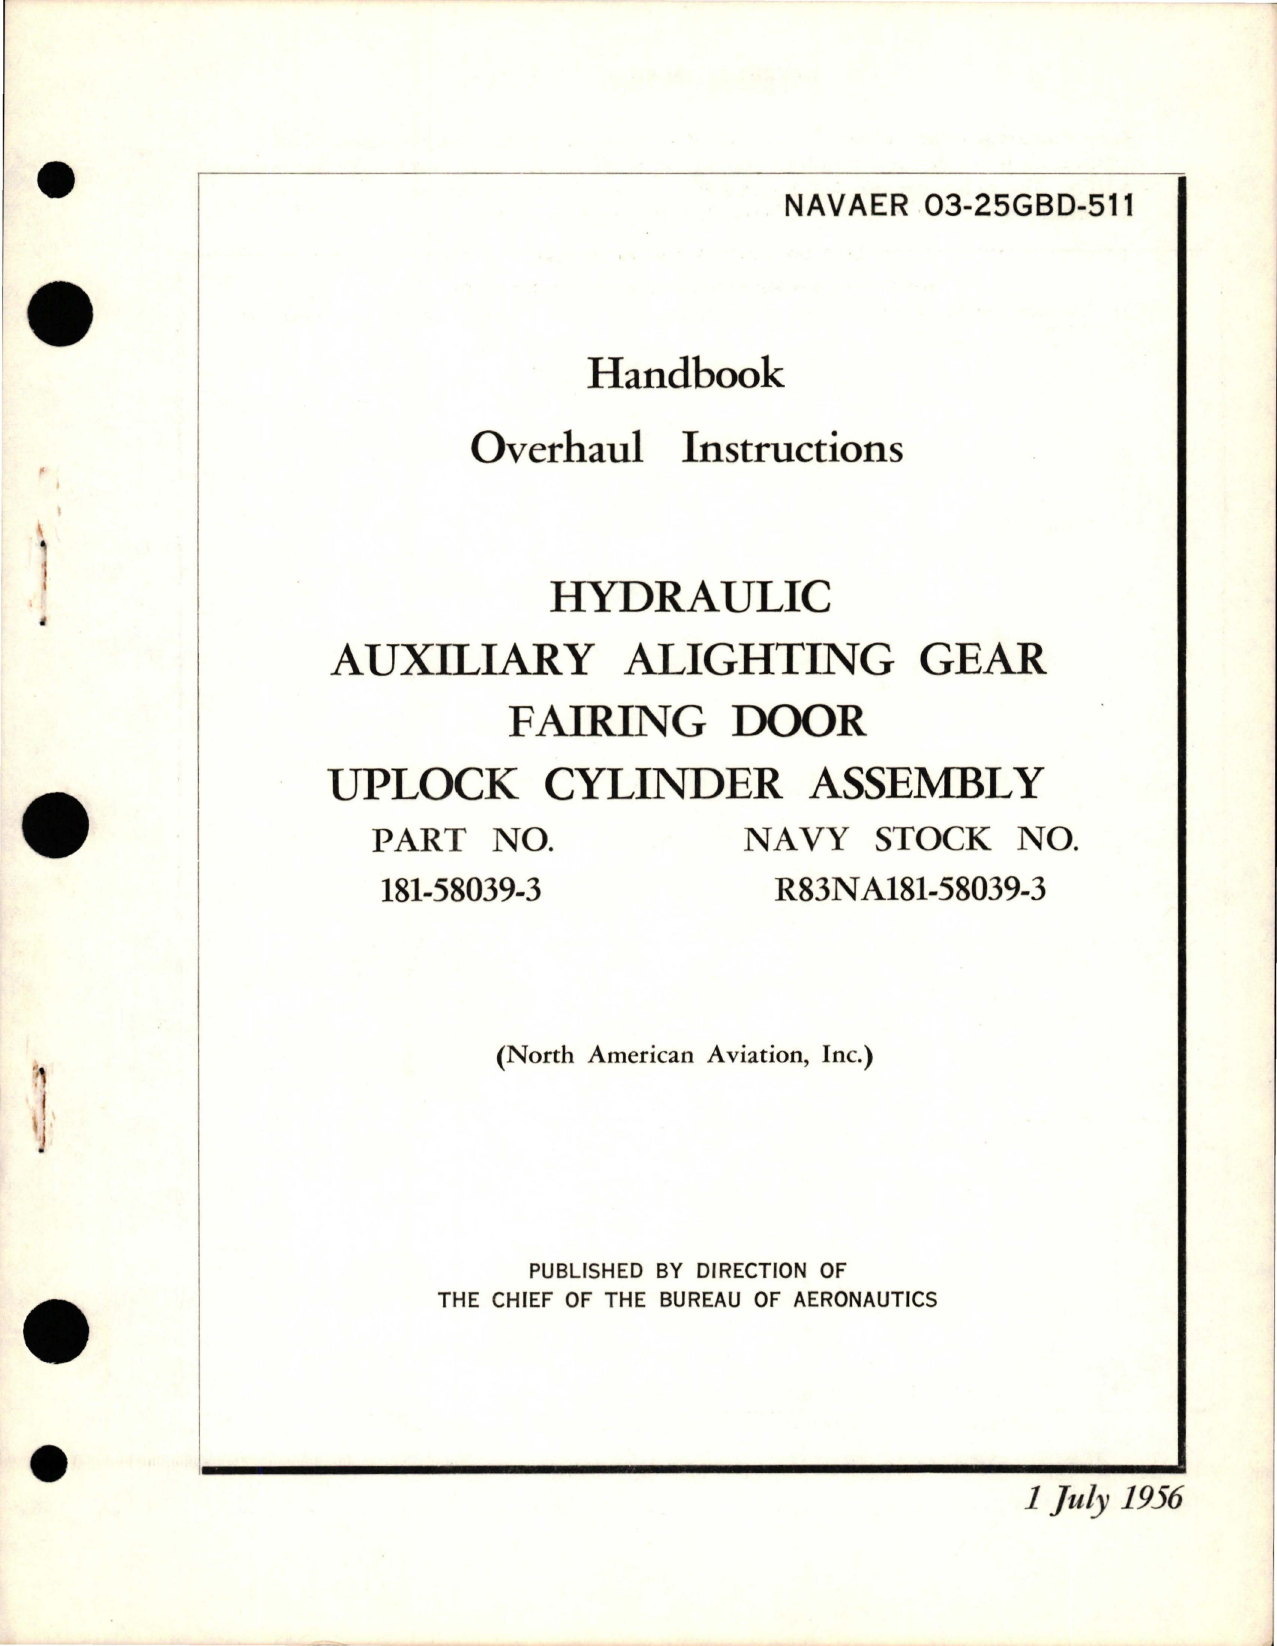 Sample page 1 from AirCorps Library document: Overhaul Instructions for Hydraulic Auxiliary Alighting Gear Fairing Door Uplock Cylinder Assembly - Part 181-58039-3